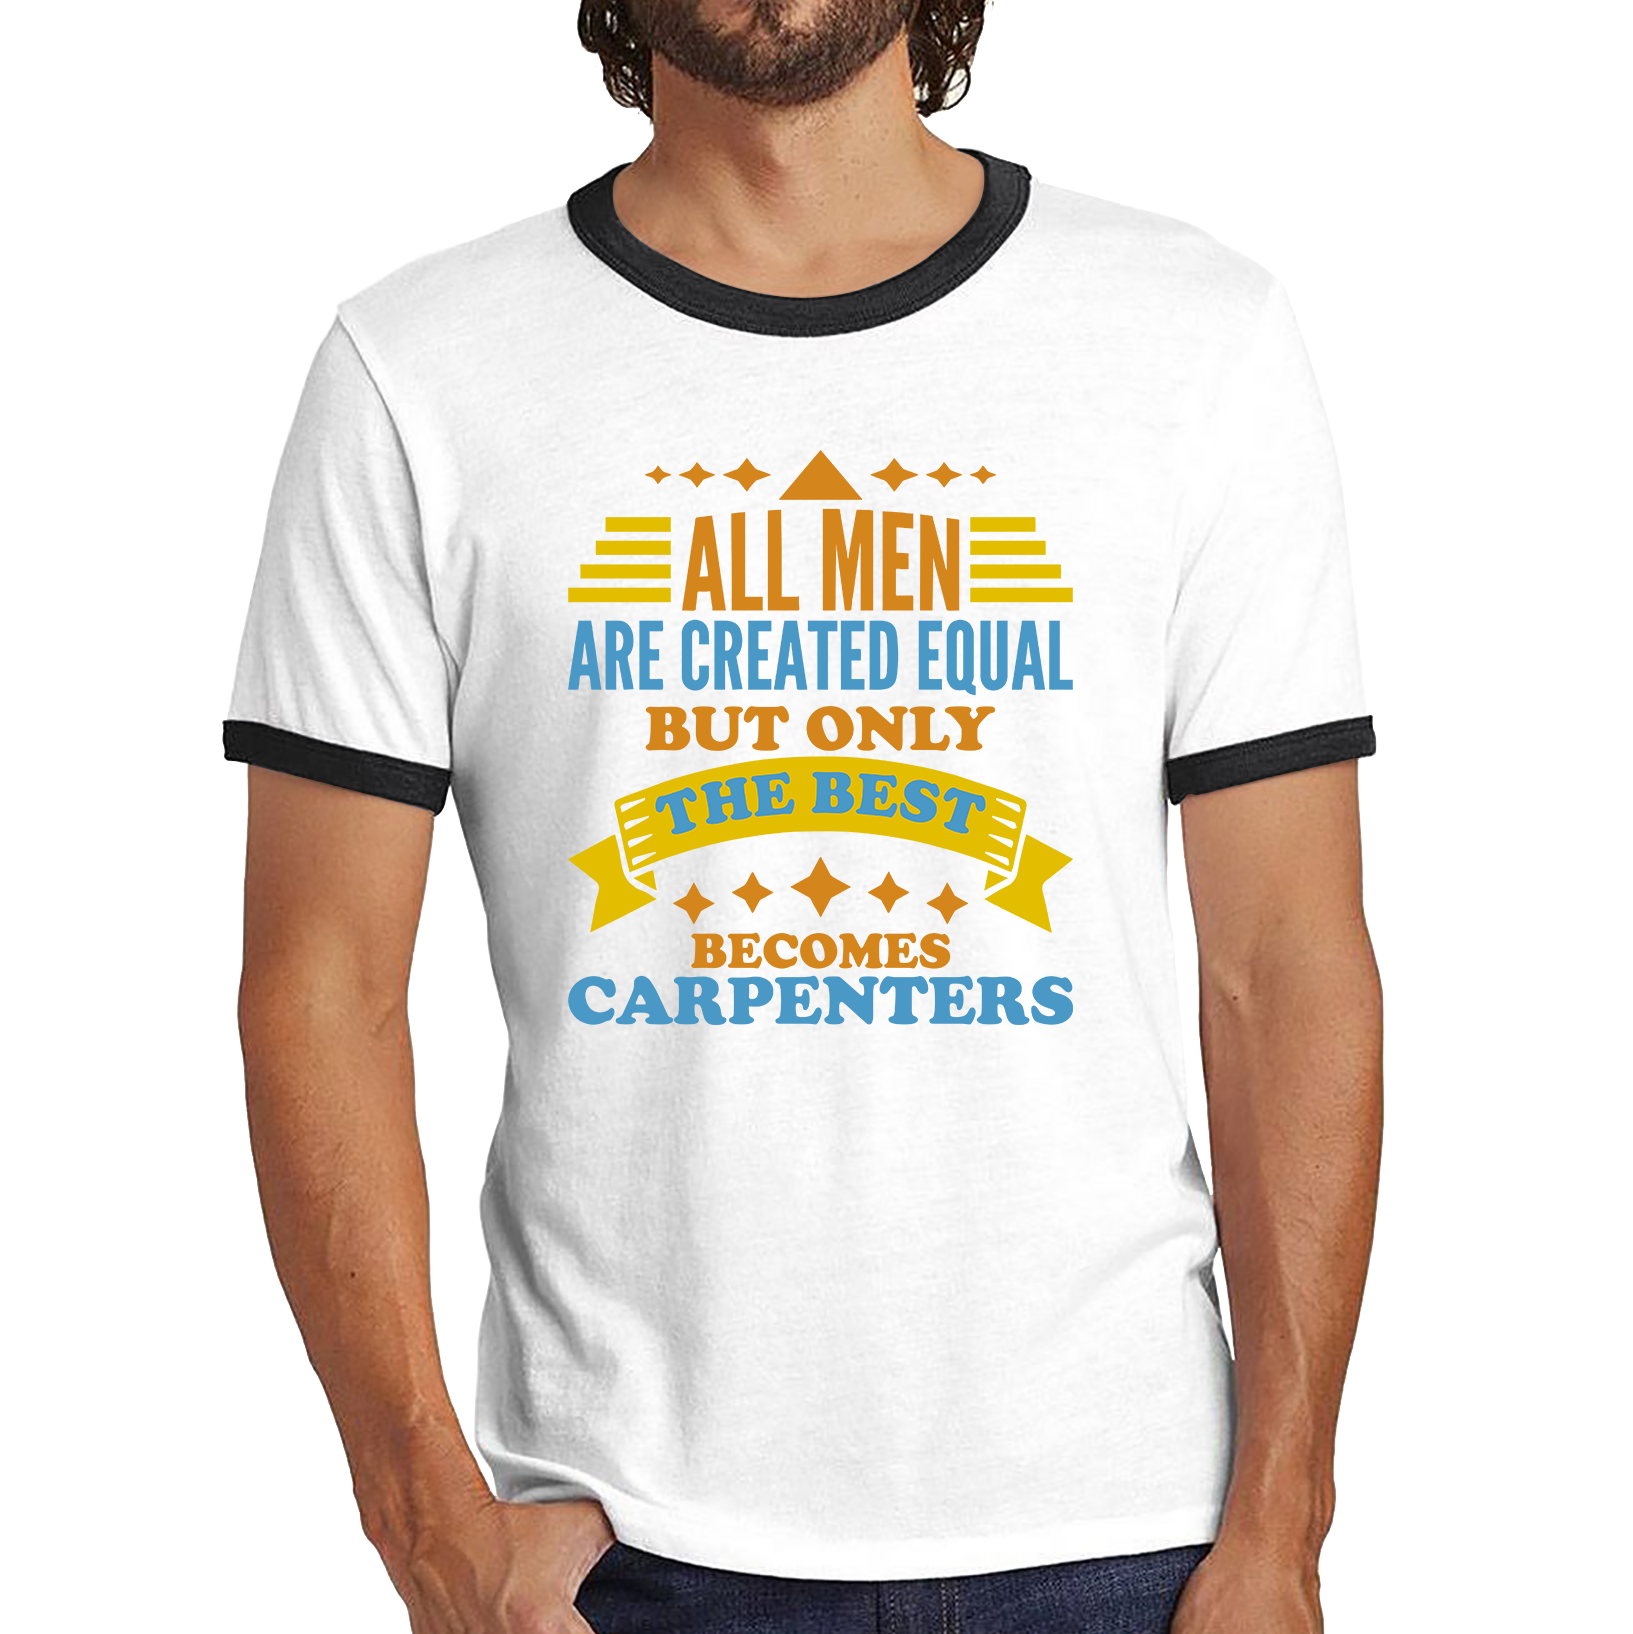 All Men Are Created Equal But Only The Best Becomes Carpenters Ringer T Shirt